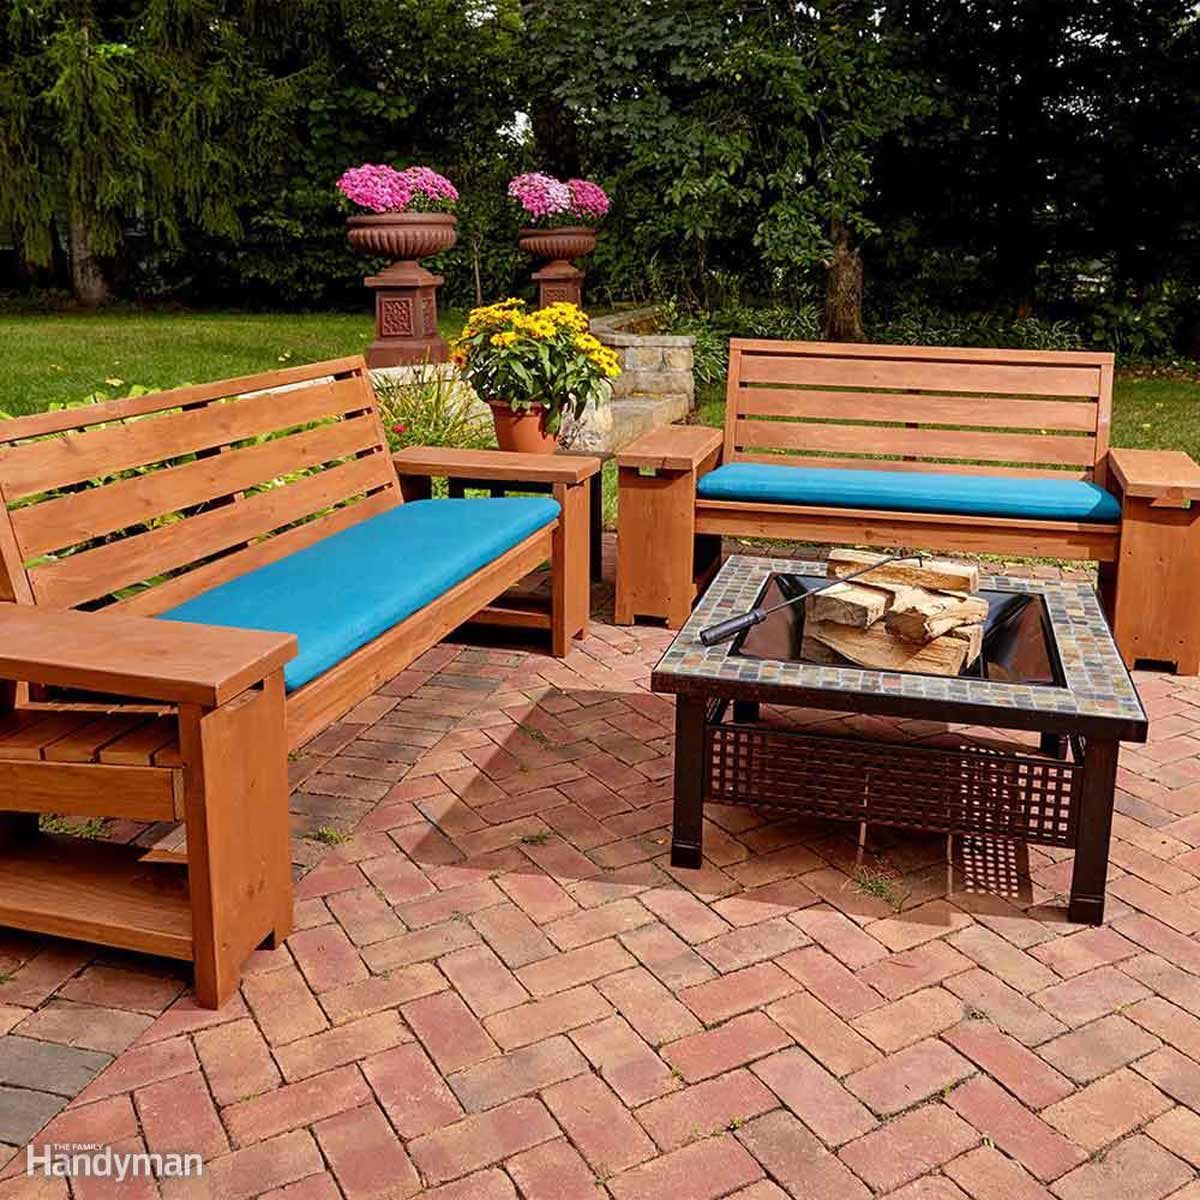 15 Awesome Plans for DIY Patio Furniture | The Family Handyman